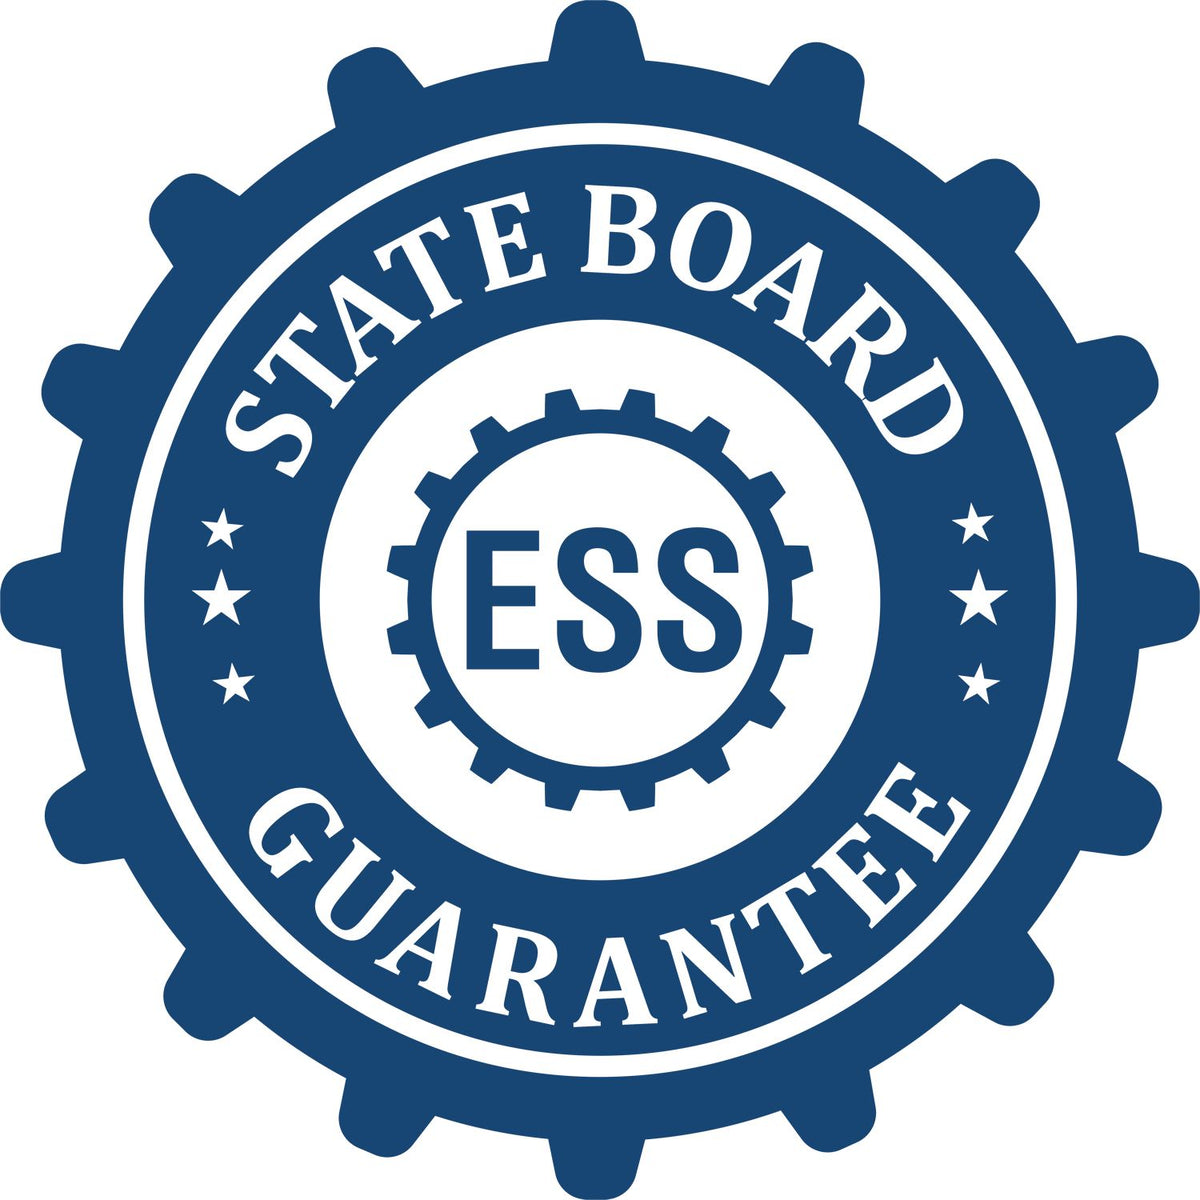 An emblem in a gear shape illustrating a state board guarantee for the State of Nebraska Long Reach Architectural Embossing Seal product.